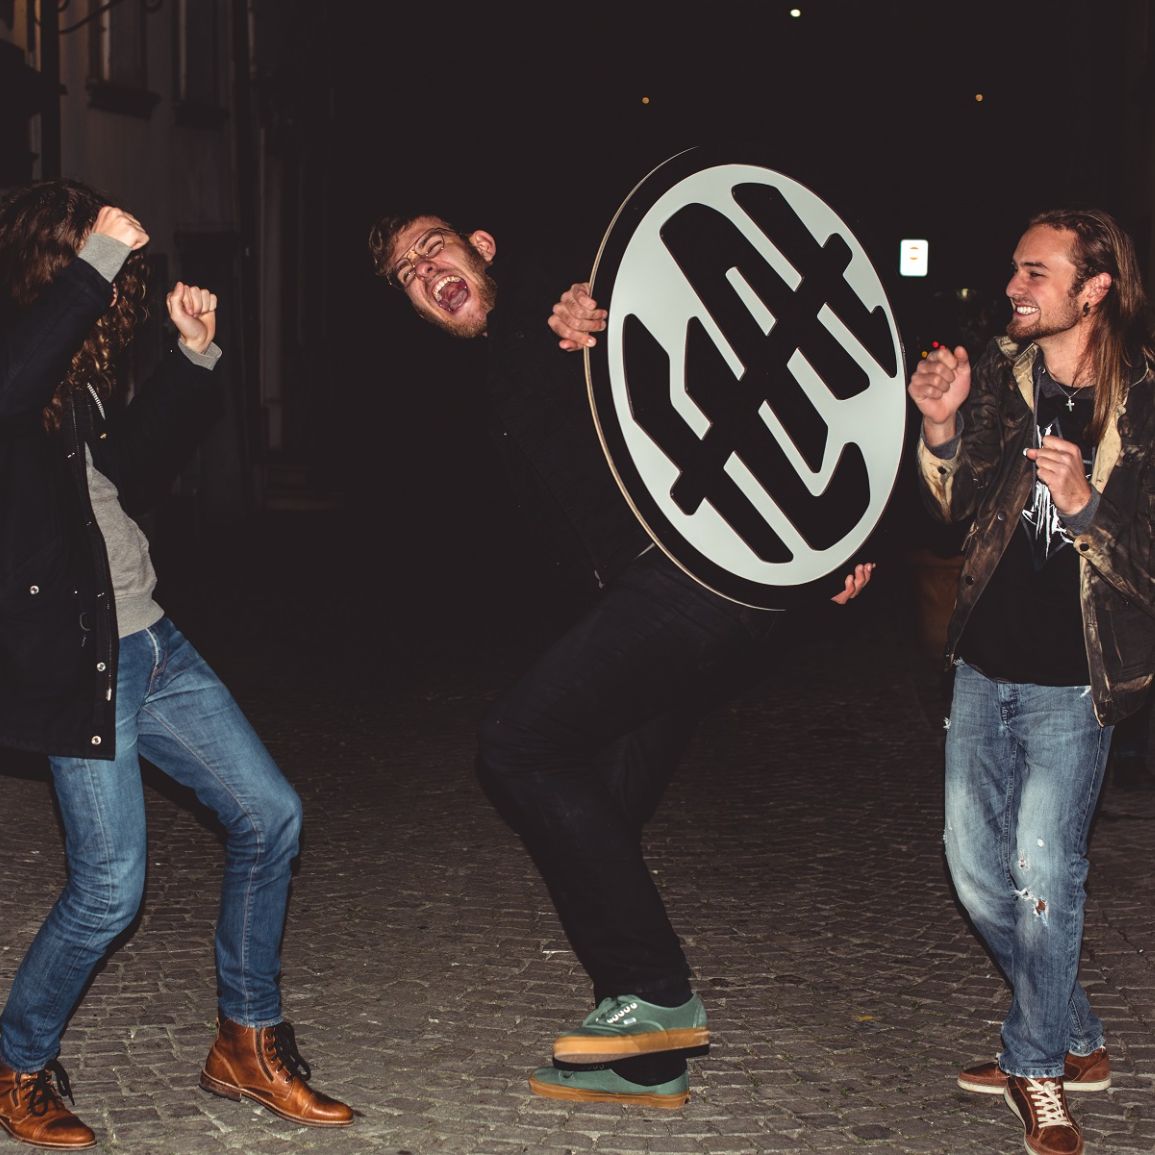 Band members of Flat photographed in the streets of Aarau.